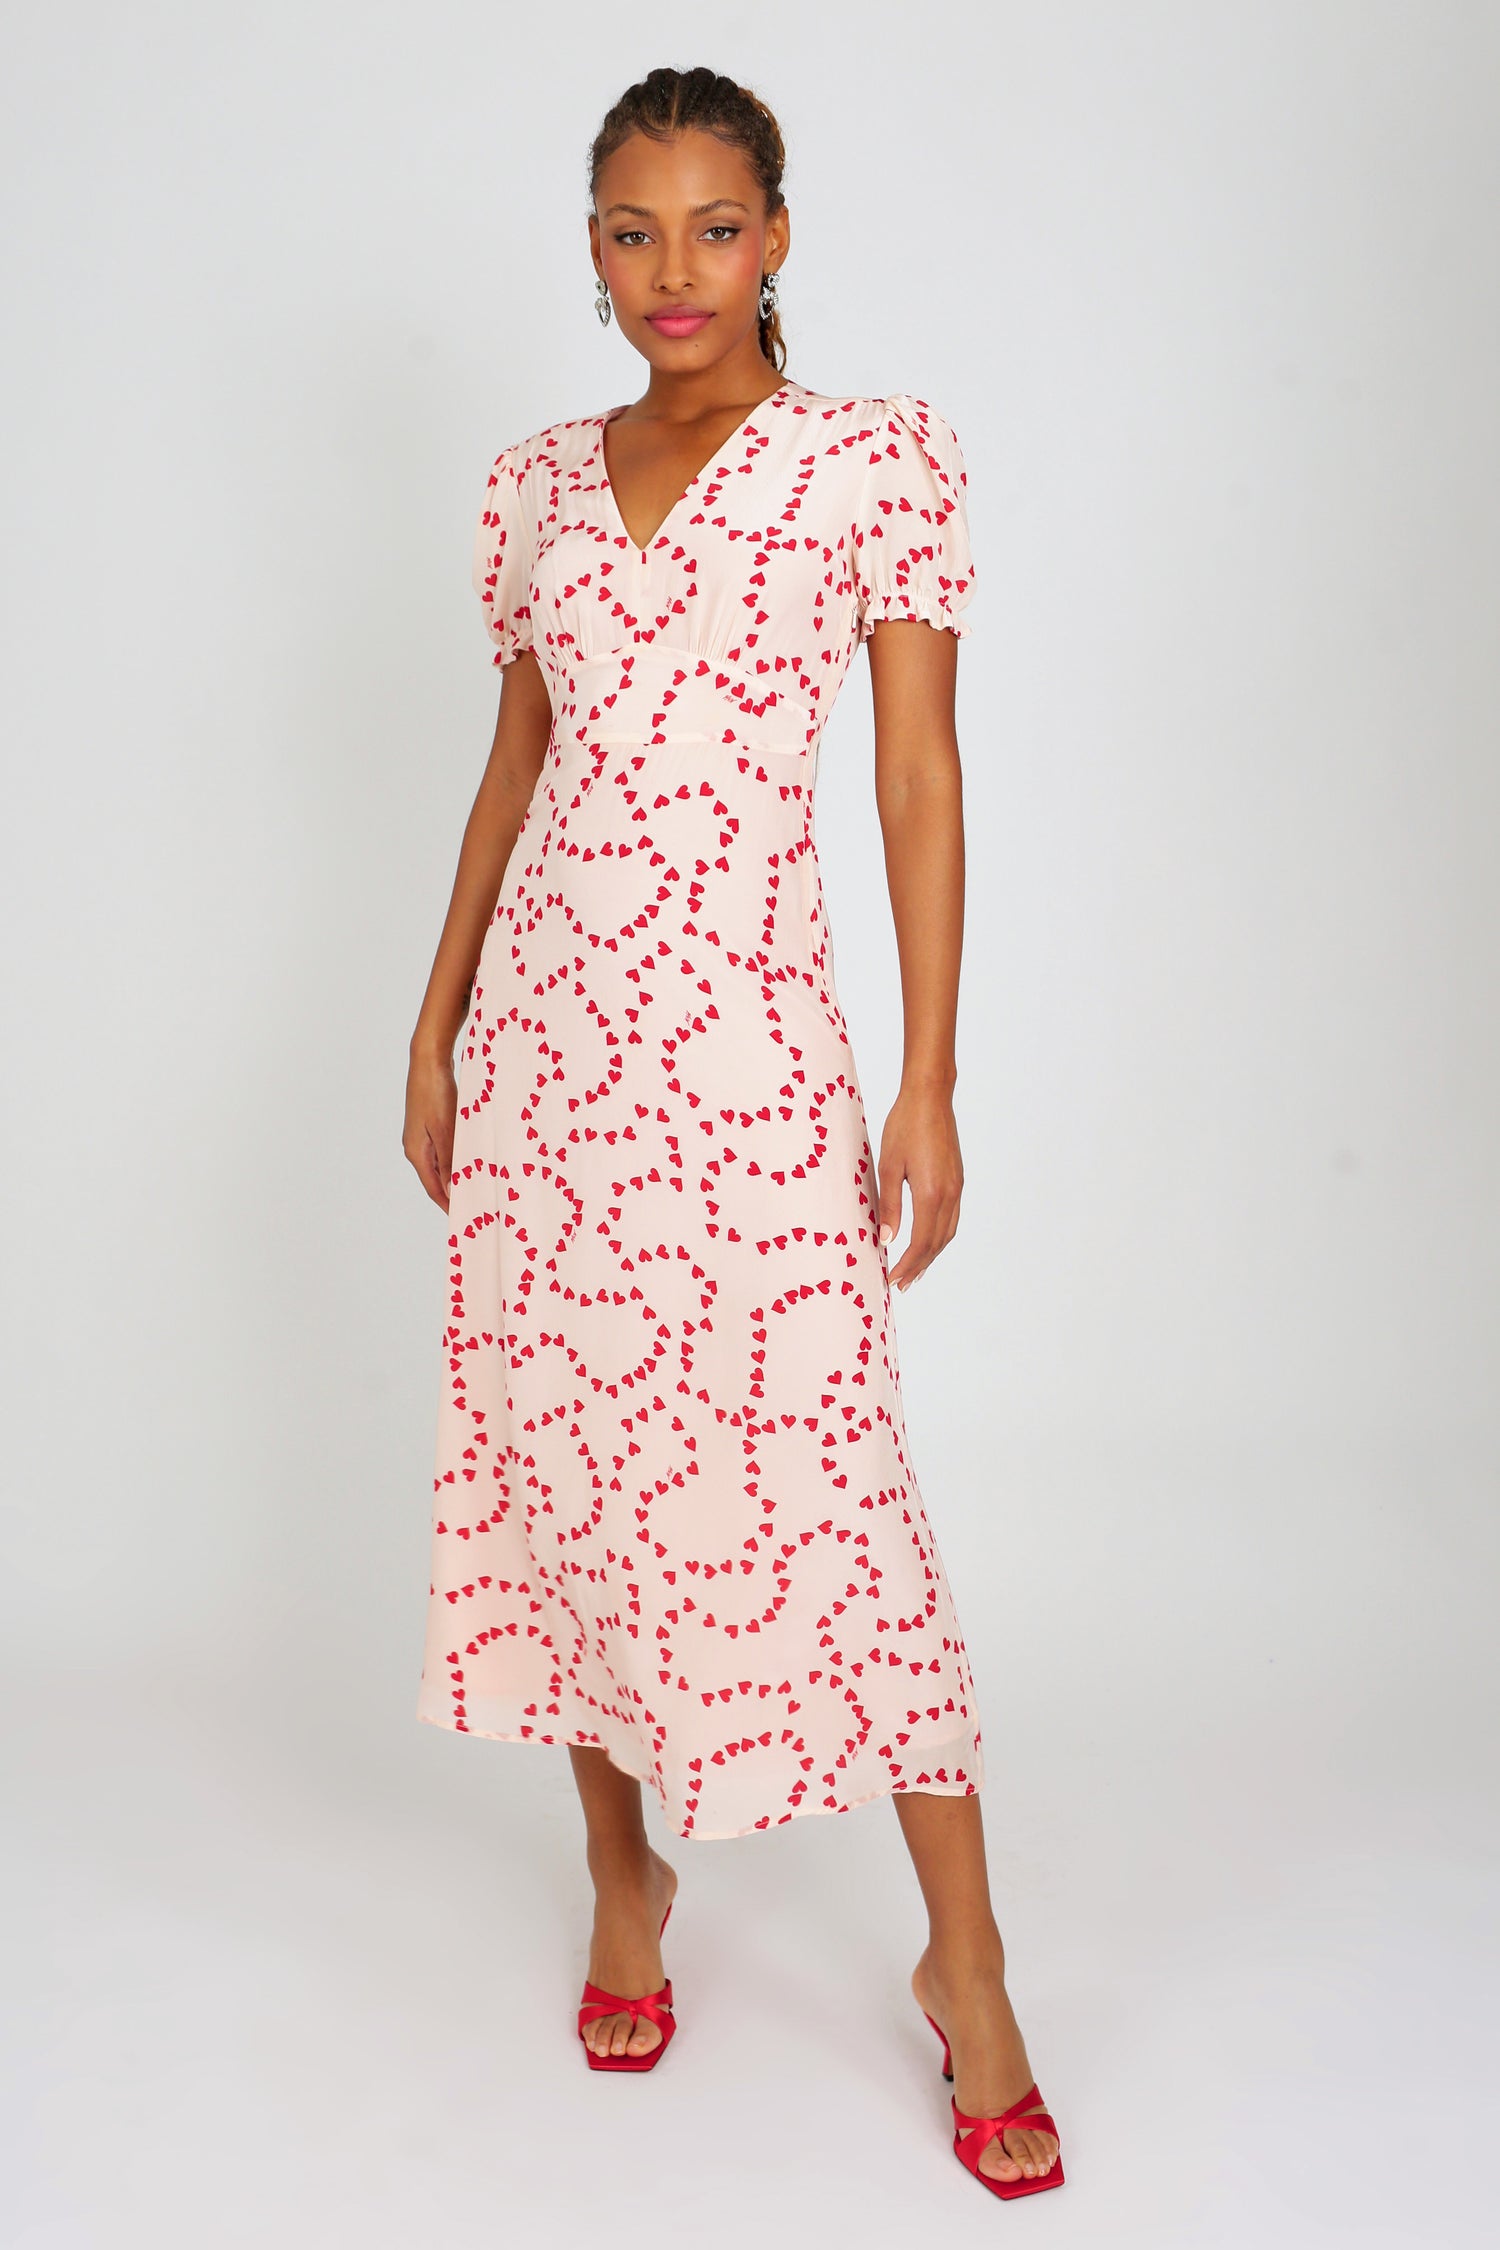 Pulling at Heart Strings Jacquard Dress - Women's Boutique Clothing &  Trendy Fashion